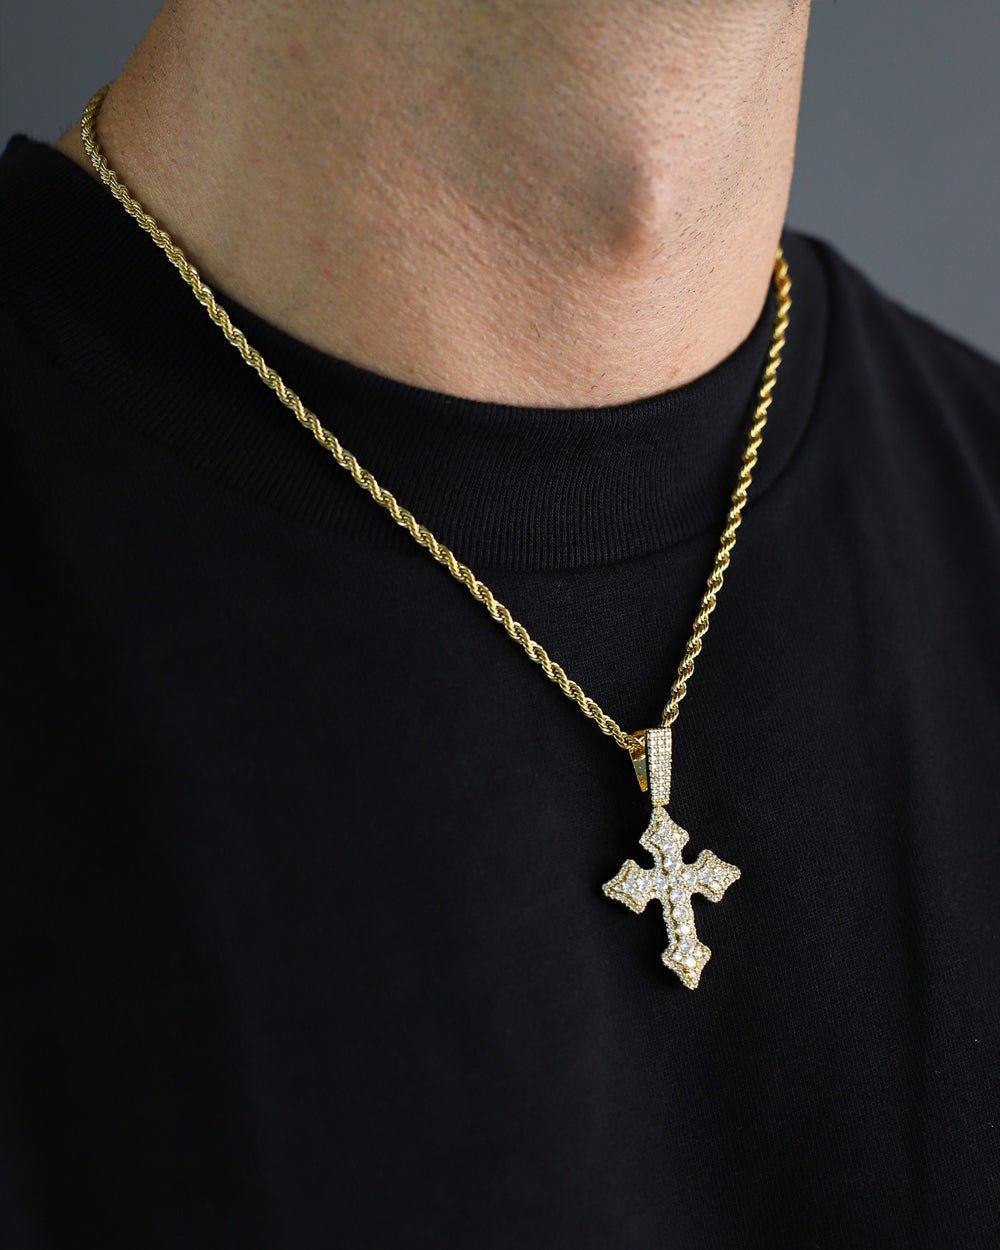 ICED BUDDED CROSS PENDANT. - 18K GOLD - DRIP IN THE JEWEL